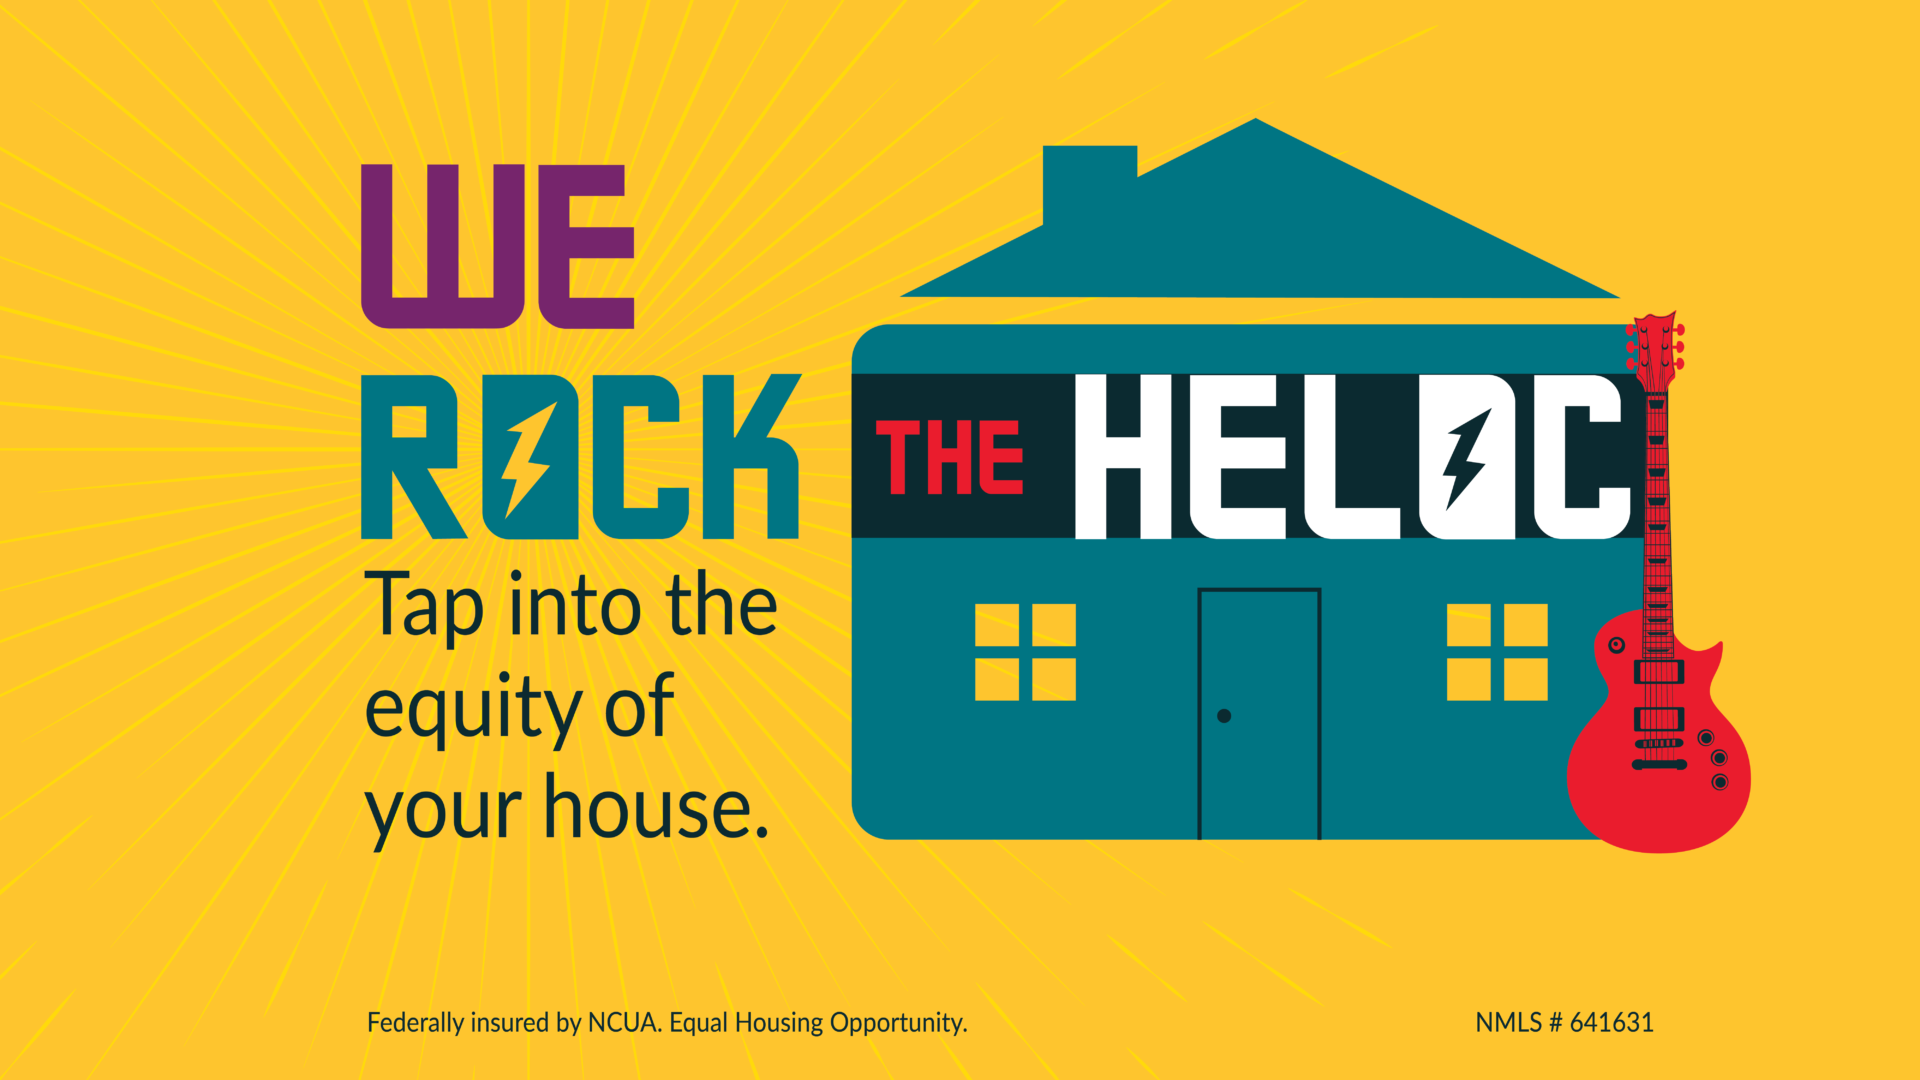 We ROCK the HELOC - Home Equity Line of Credit. Tap into the equity of your house. House shaped credit card with guitar.